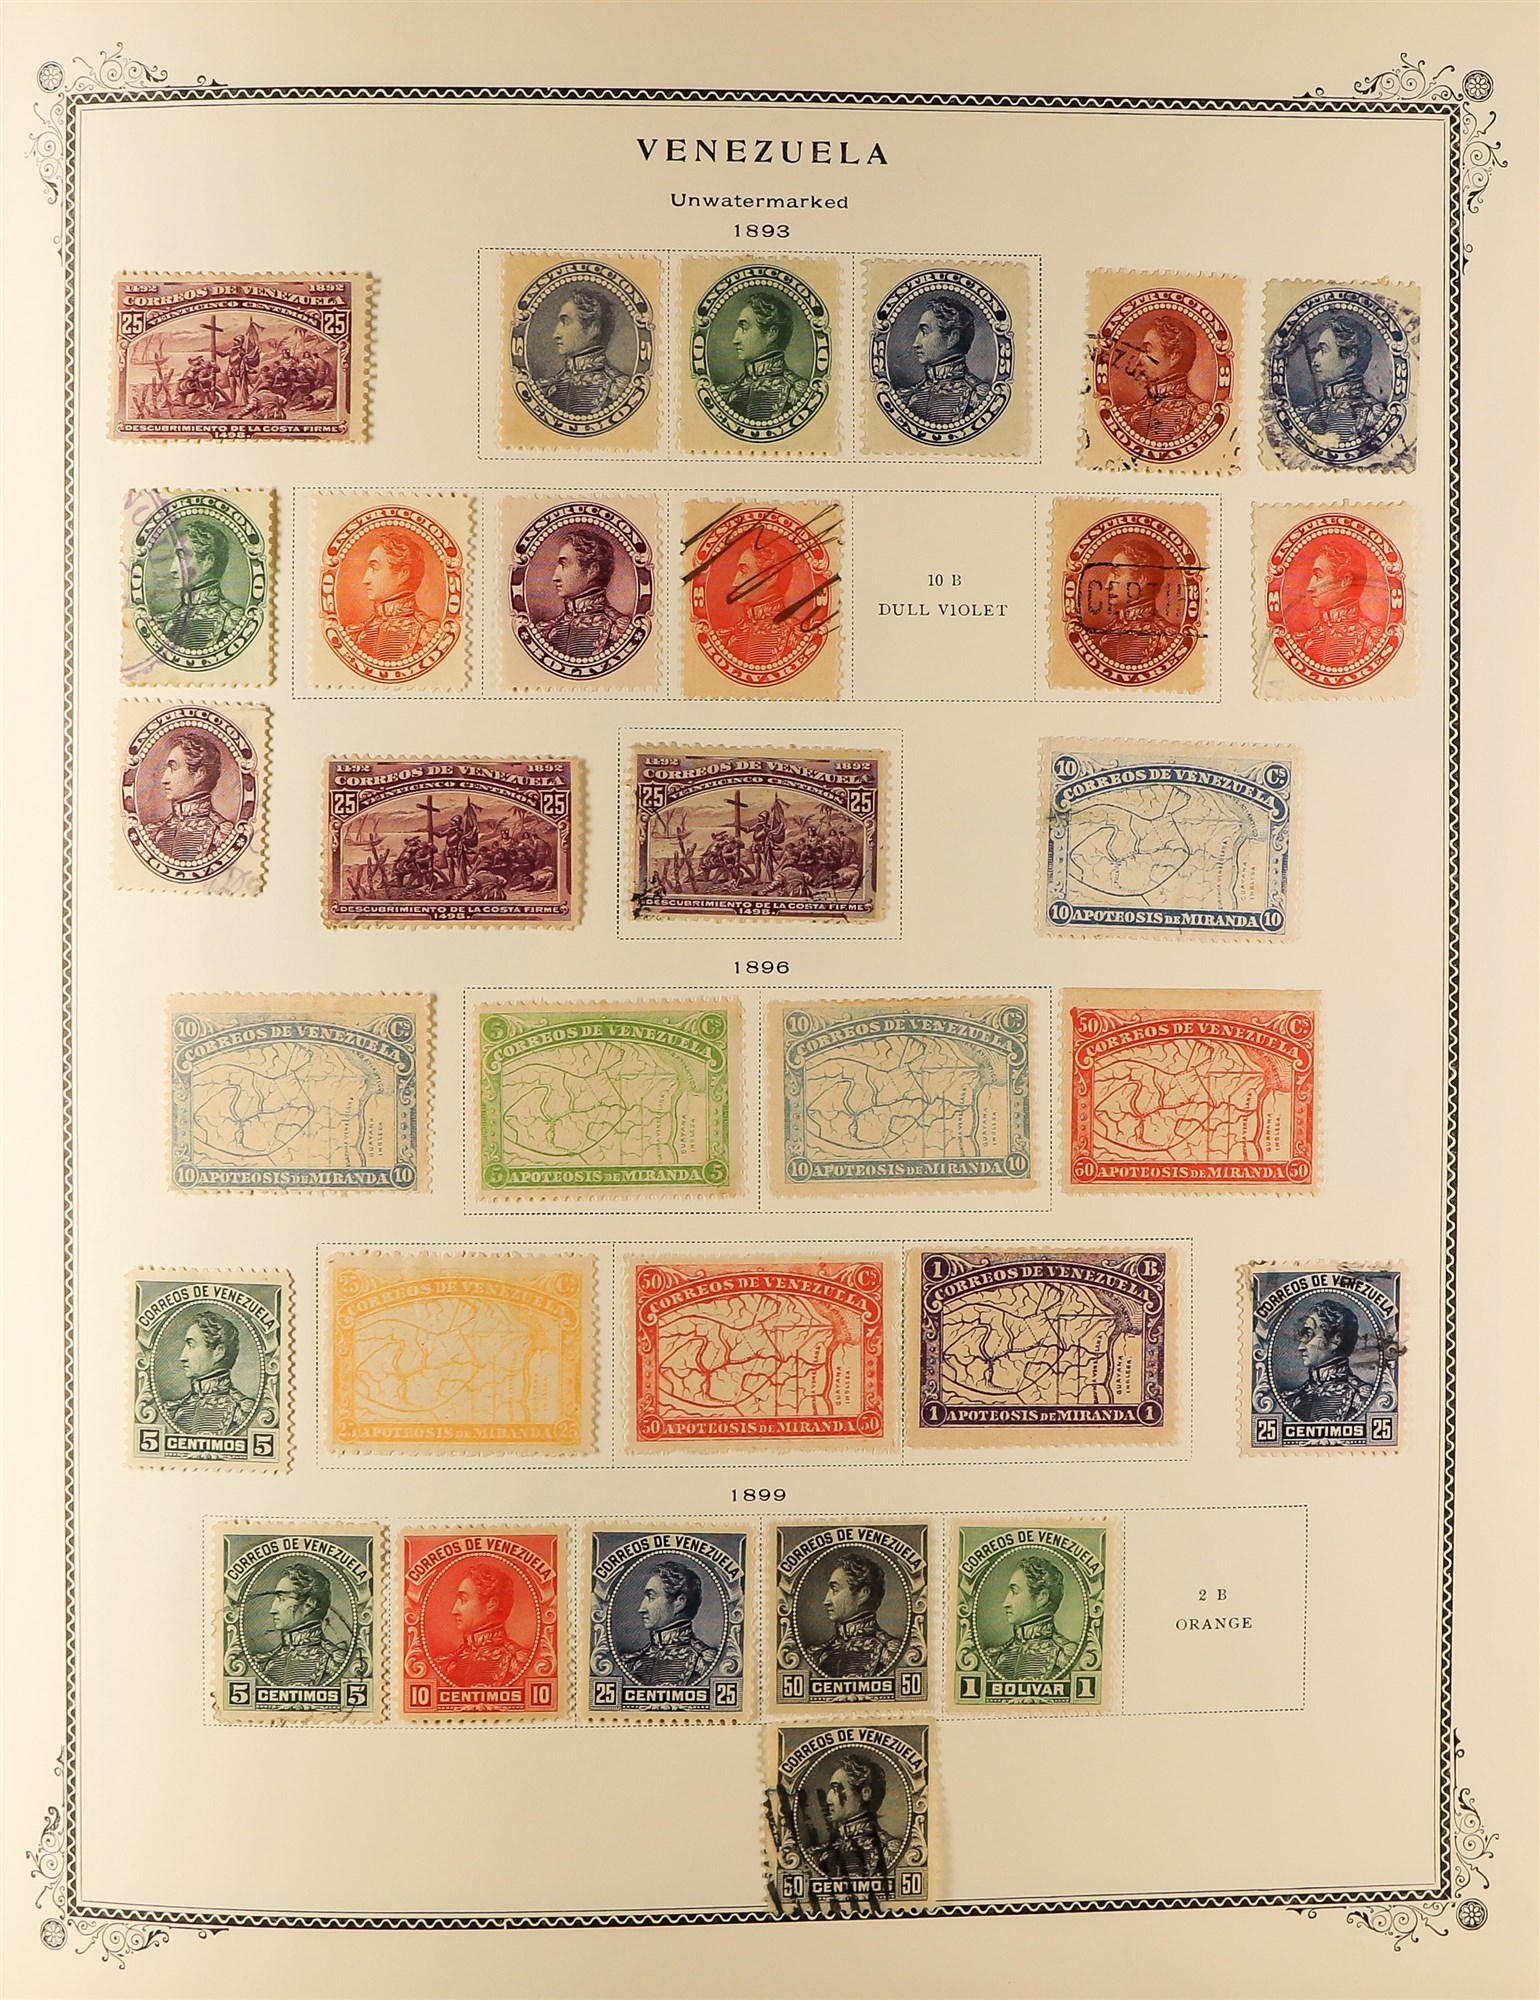 VENEZUELA 1859 - 1976 COLLECTION of 1500+ mint & used stamps in album, note 1859-62 Coat of Arms, - Image 7 of 19